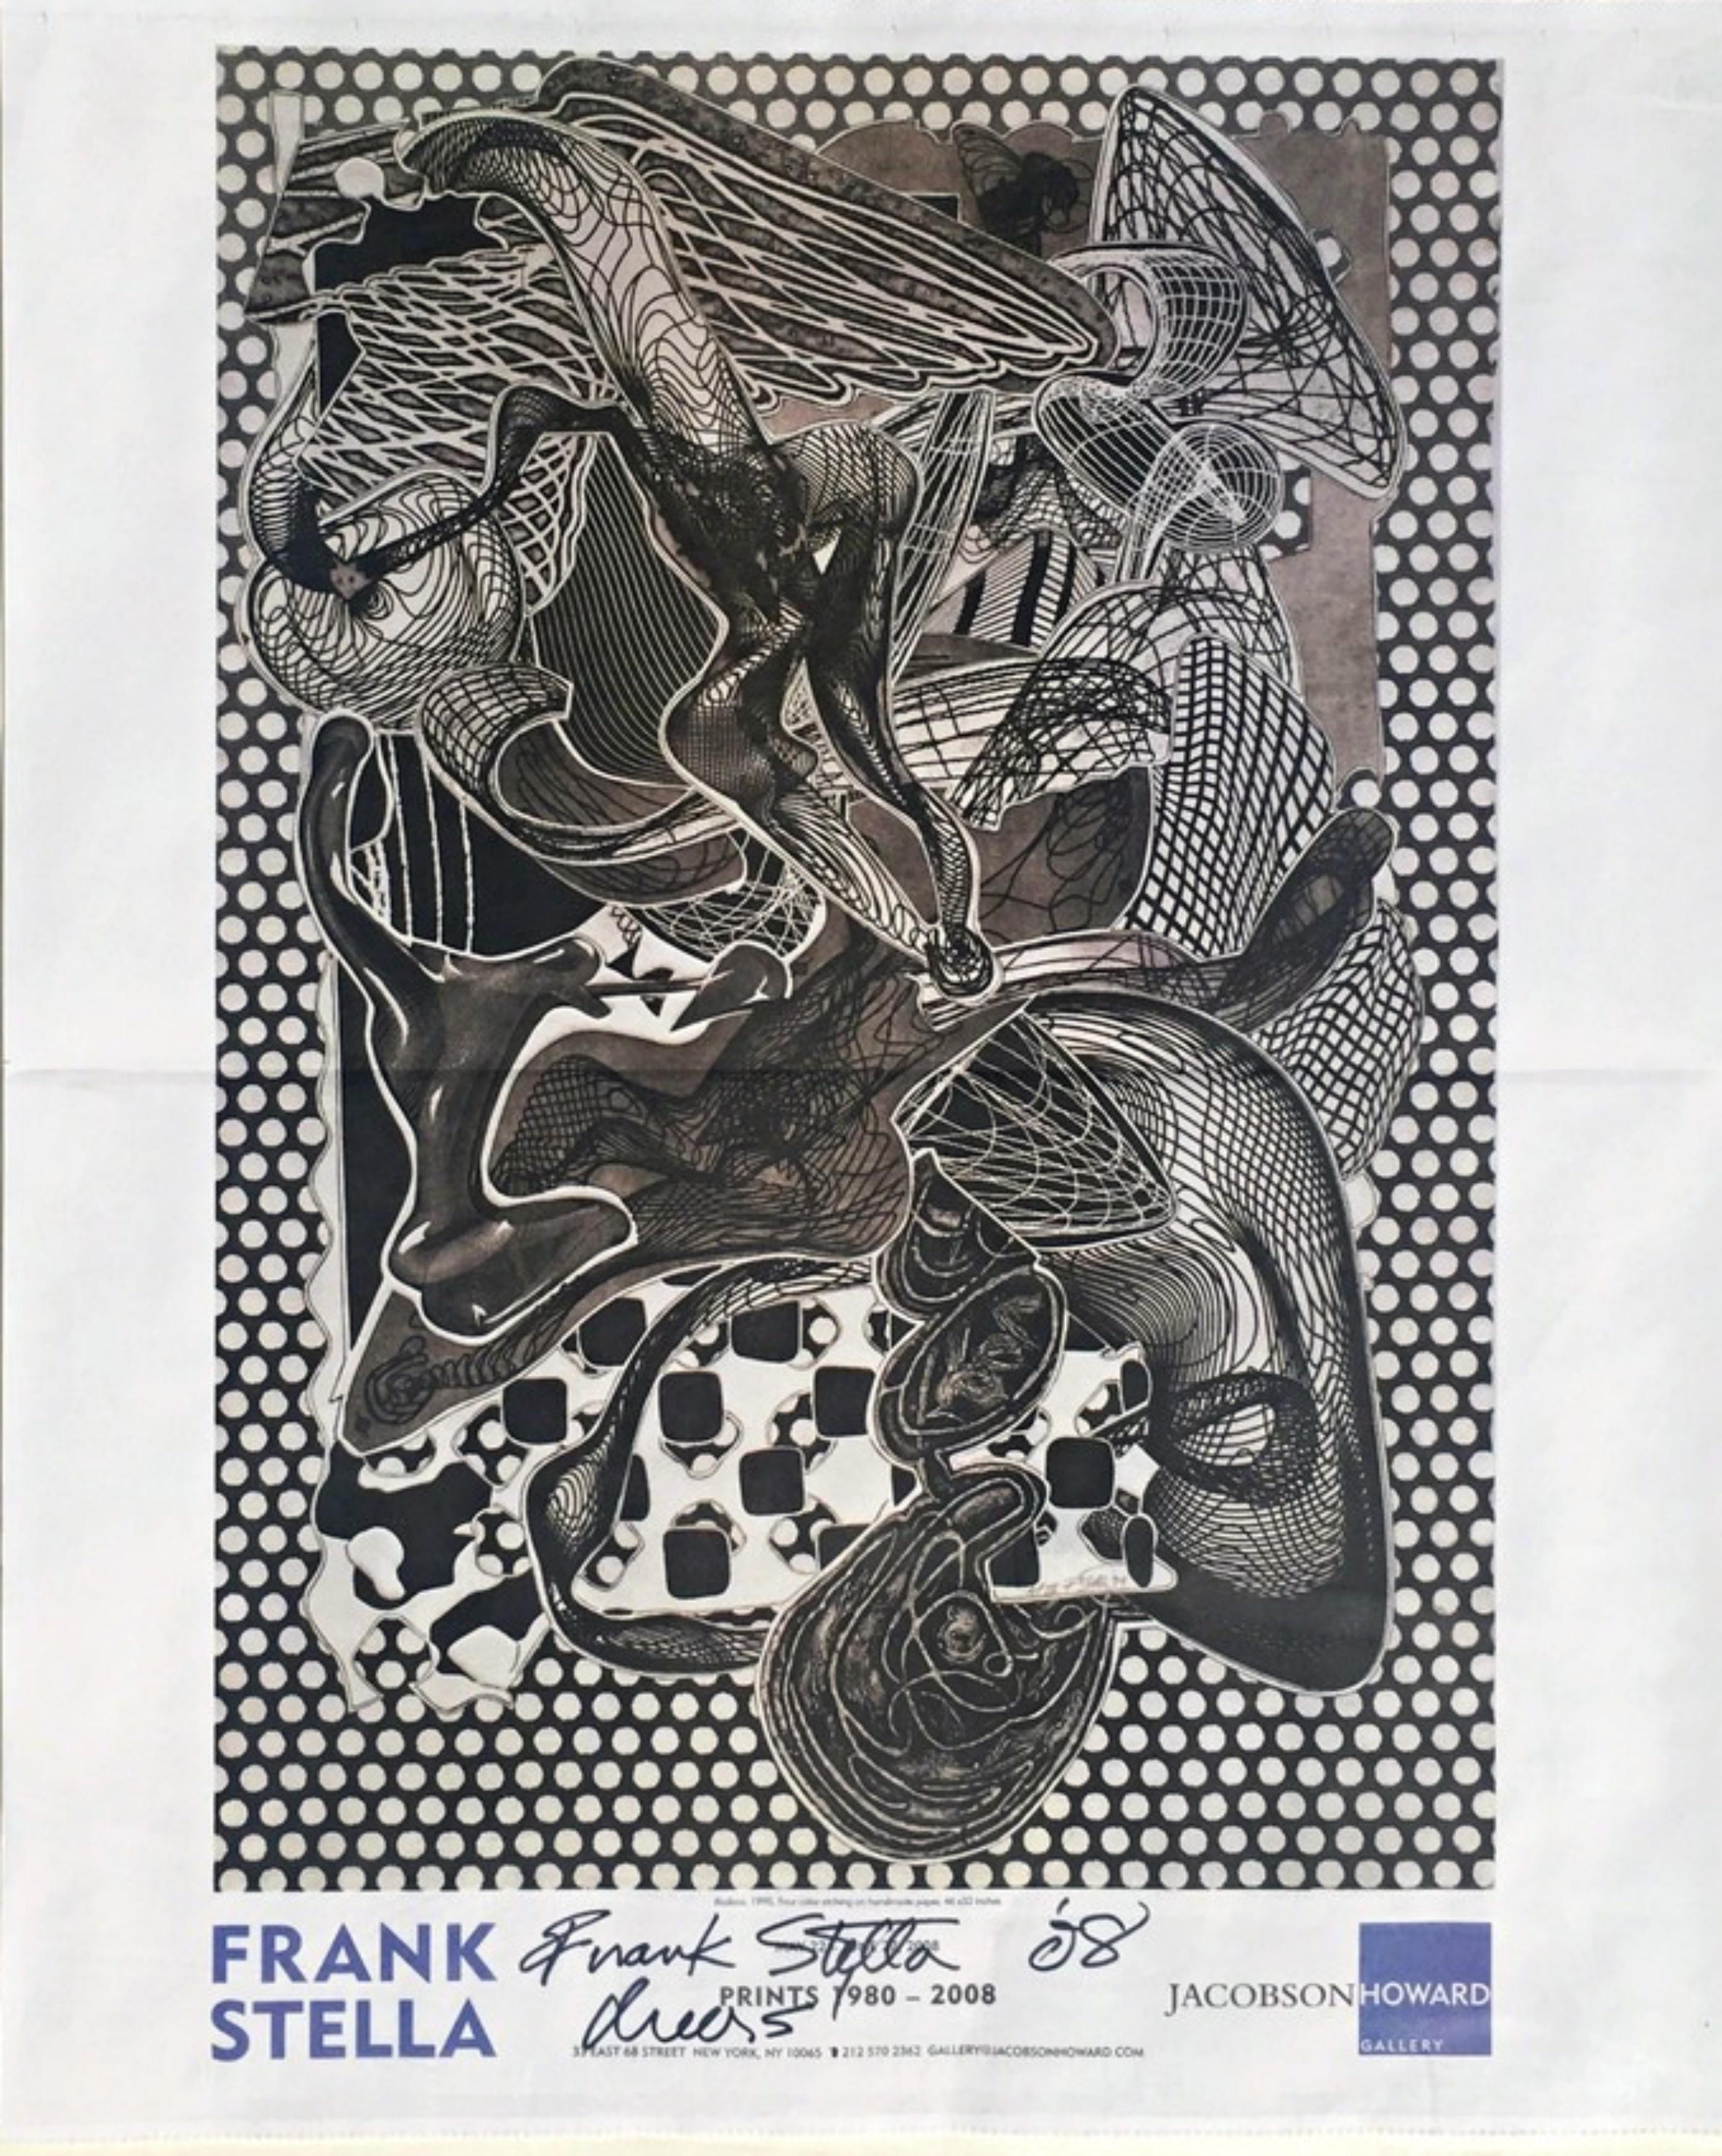 Frank Stella Abstract Print - Abstract Expressionist poster from London exhibition (Hand Signed by the artist)